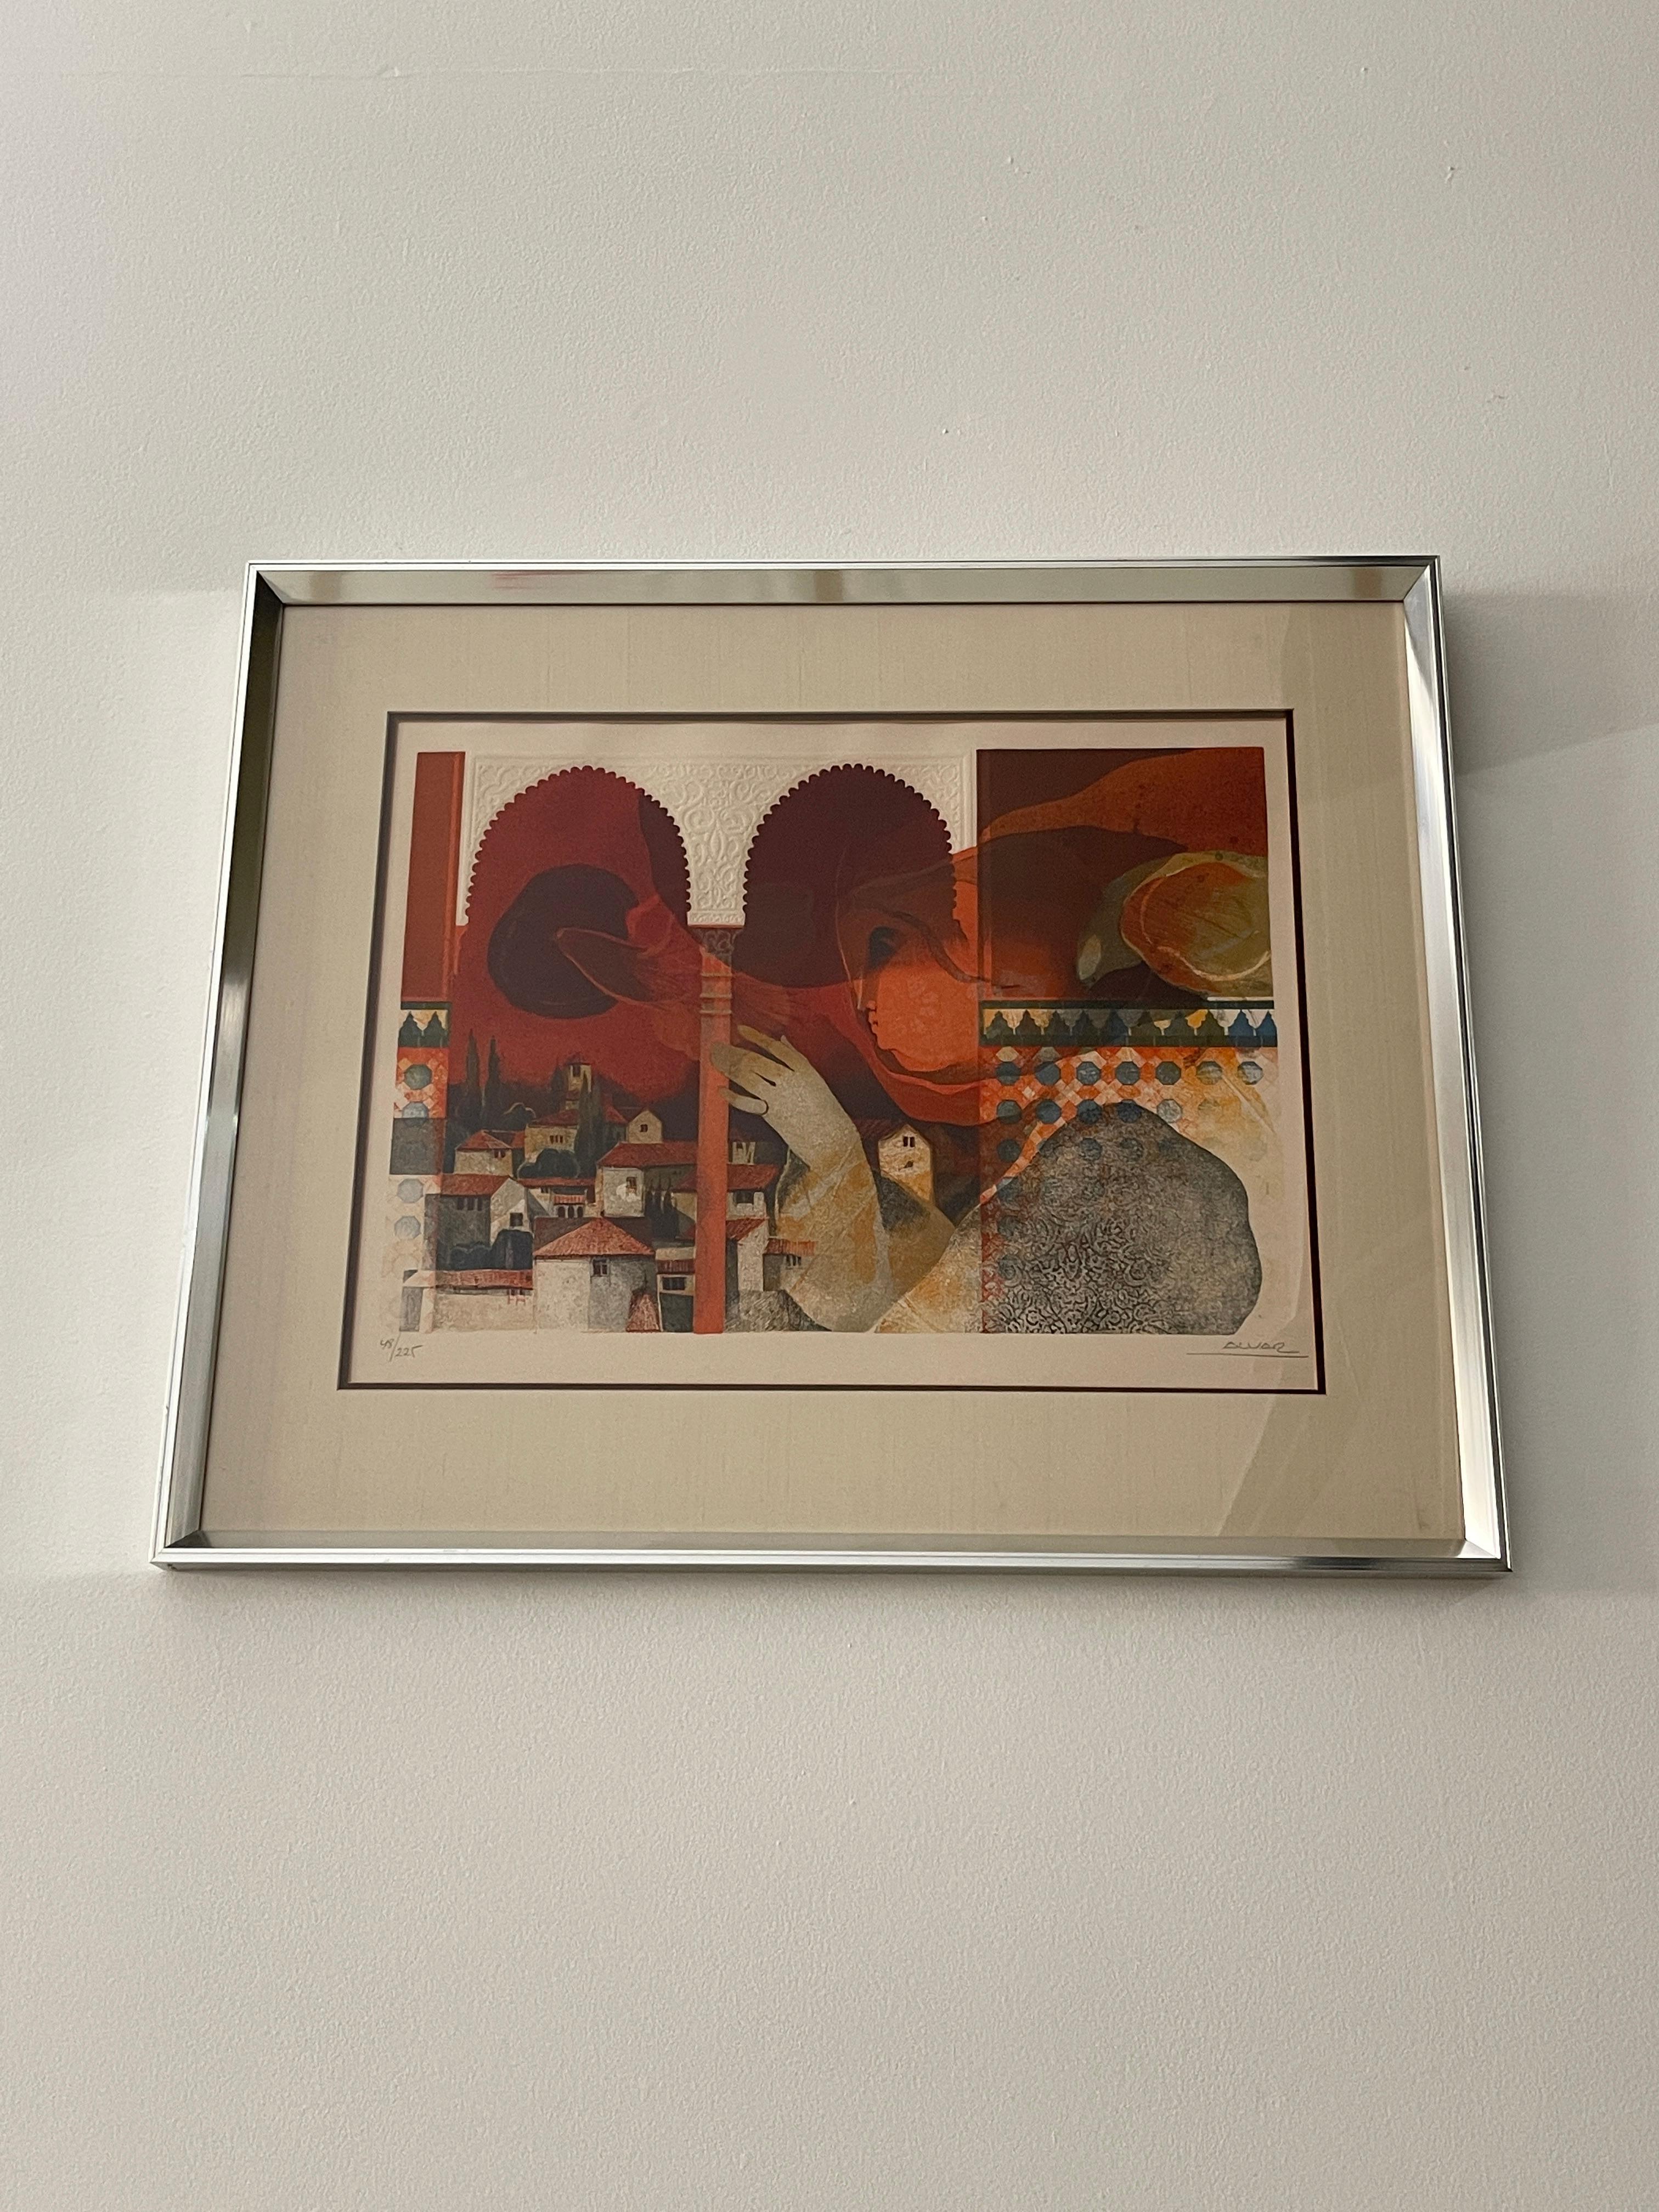 Àlvar Suñol Munoz-Ramos, also known as Alvar, is a Spanish painter, sculptor and lithographer. He is one of the few remaining living Modernist artists. Hand signed and numbered in pencil. Displayed in a chrome metal frame. Circa 1960s.